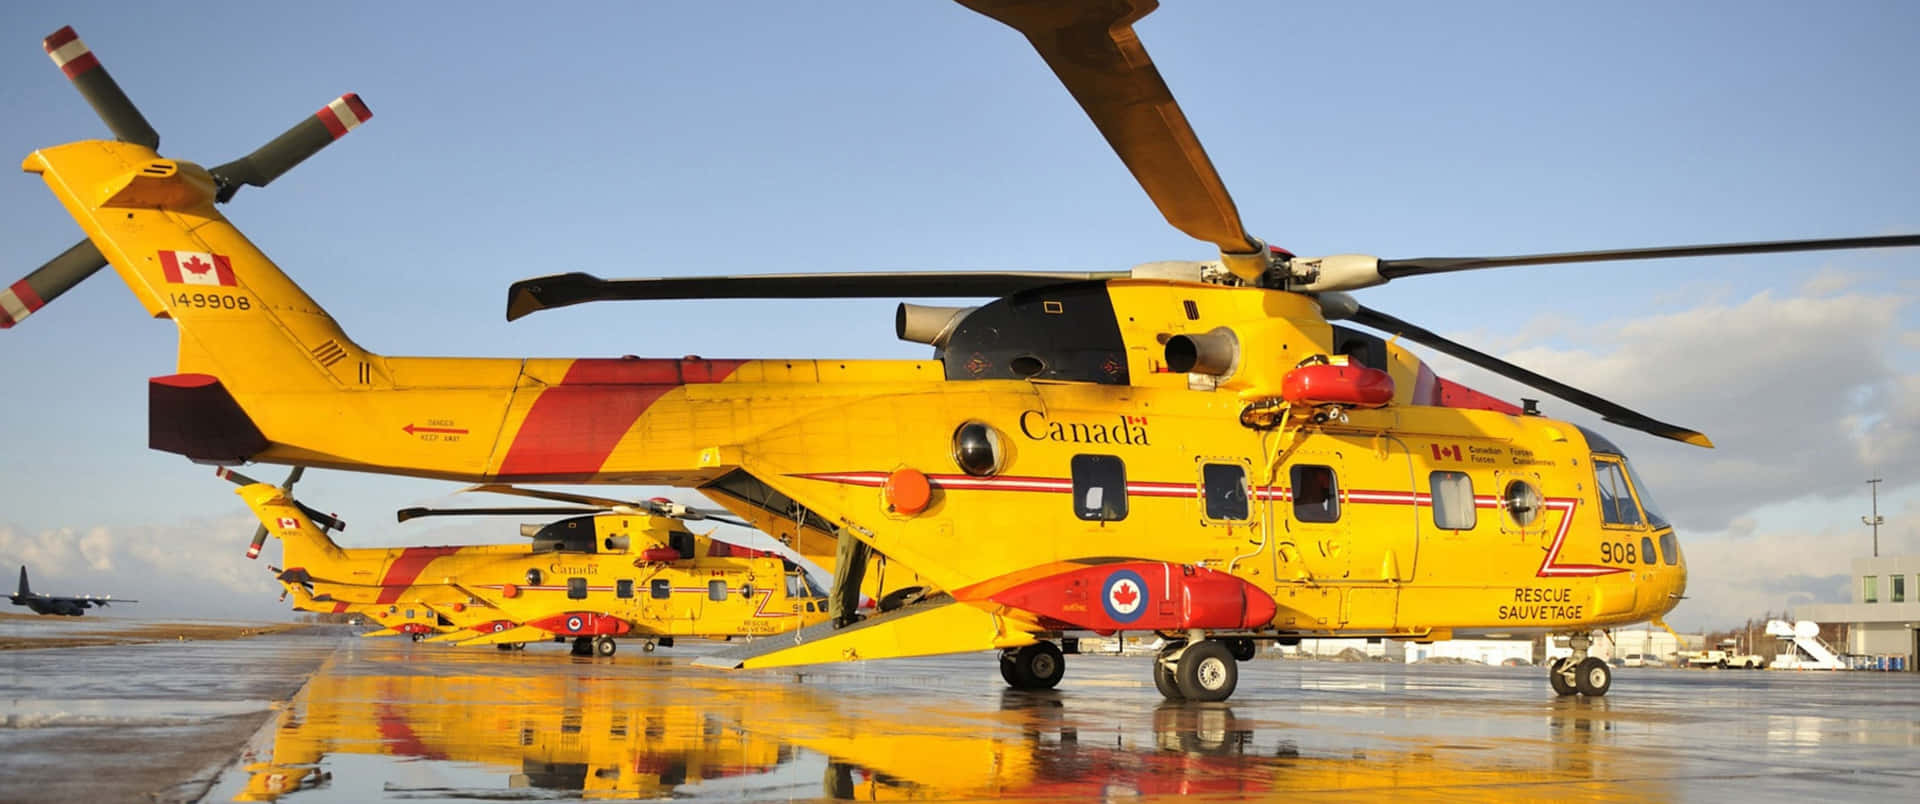 Two Yellow And Red Helicopters Parked On The Tarmac